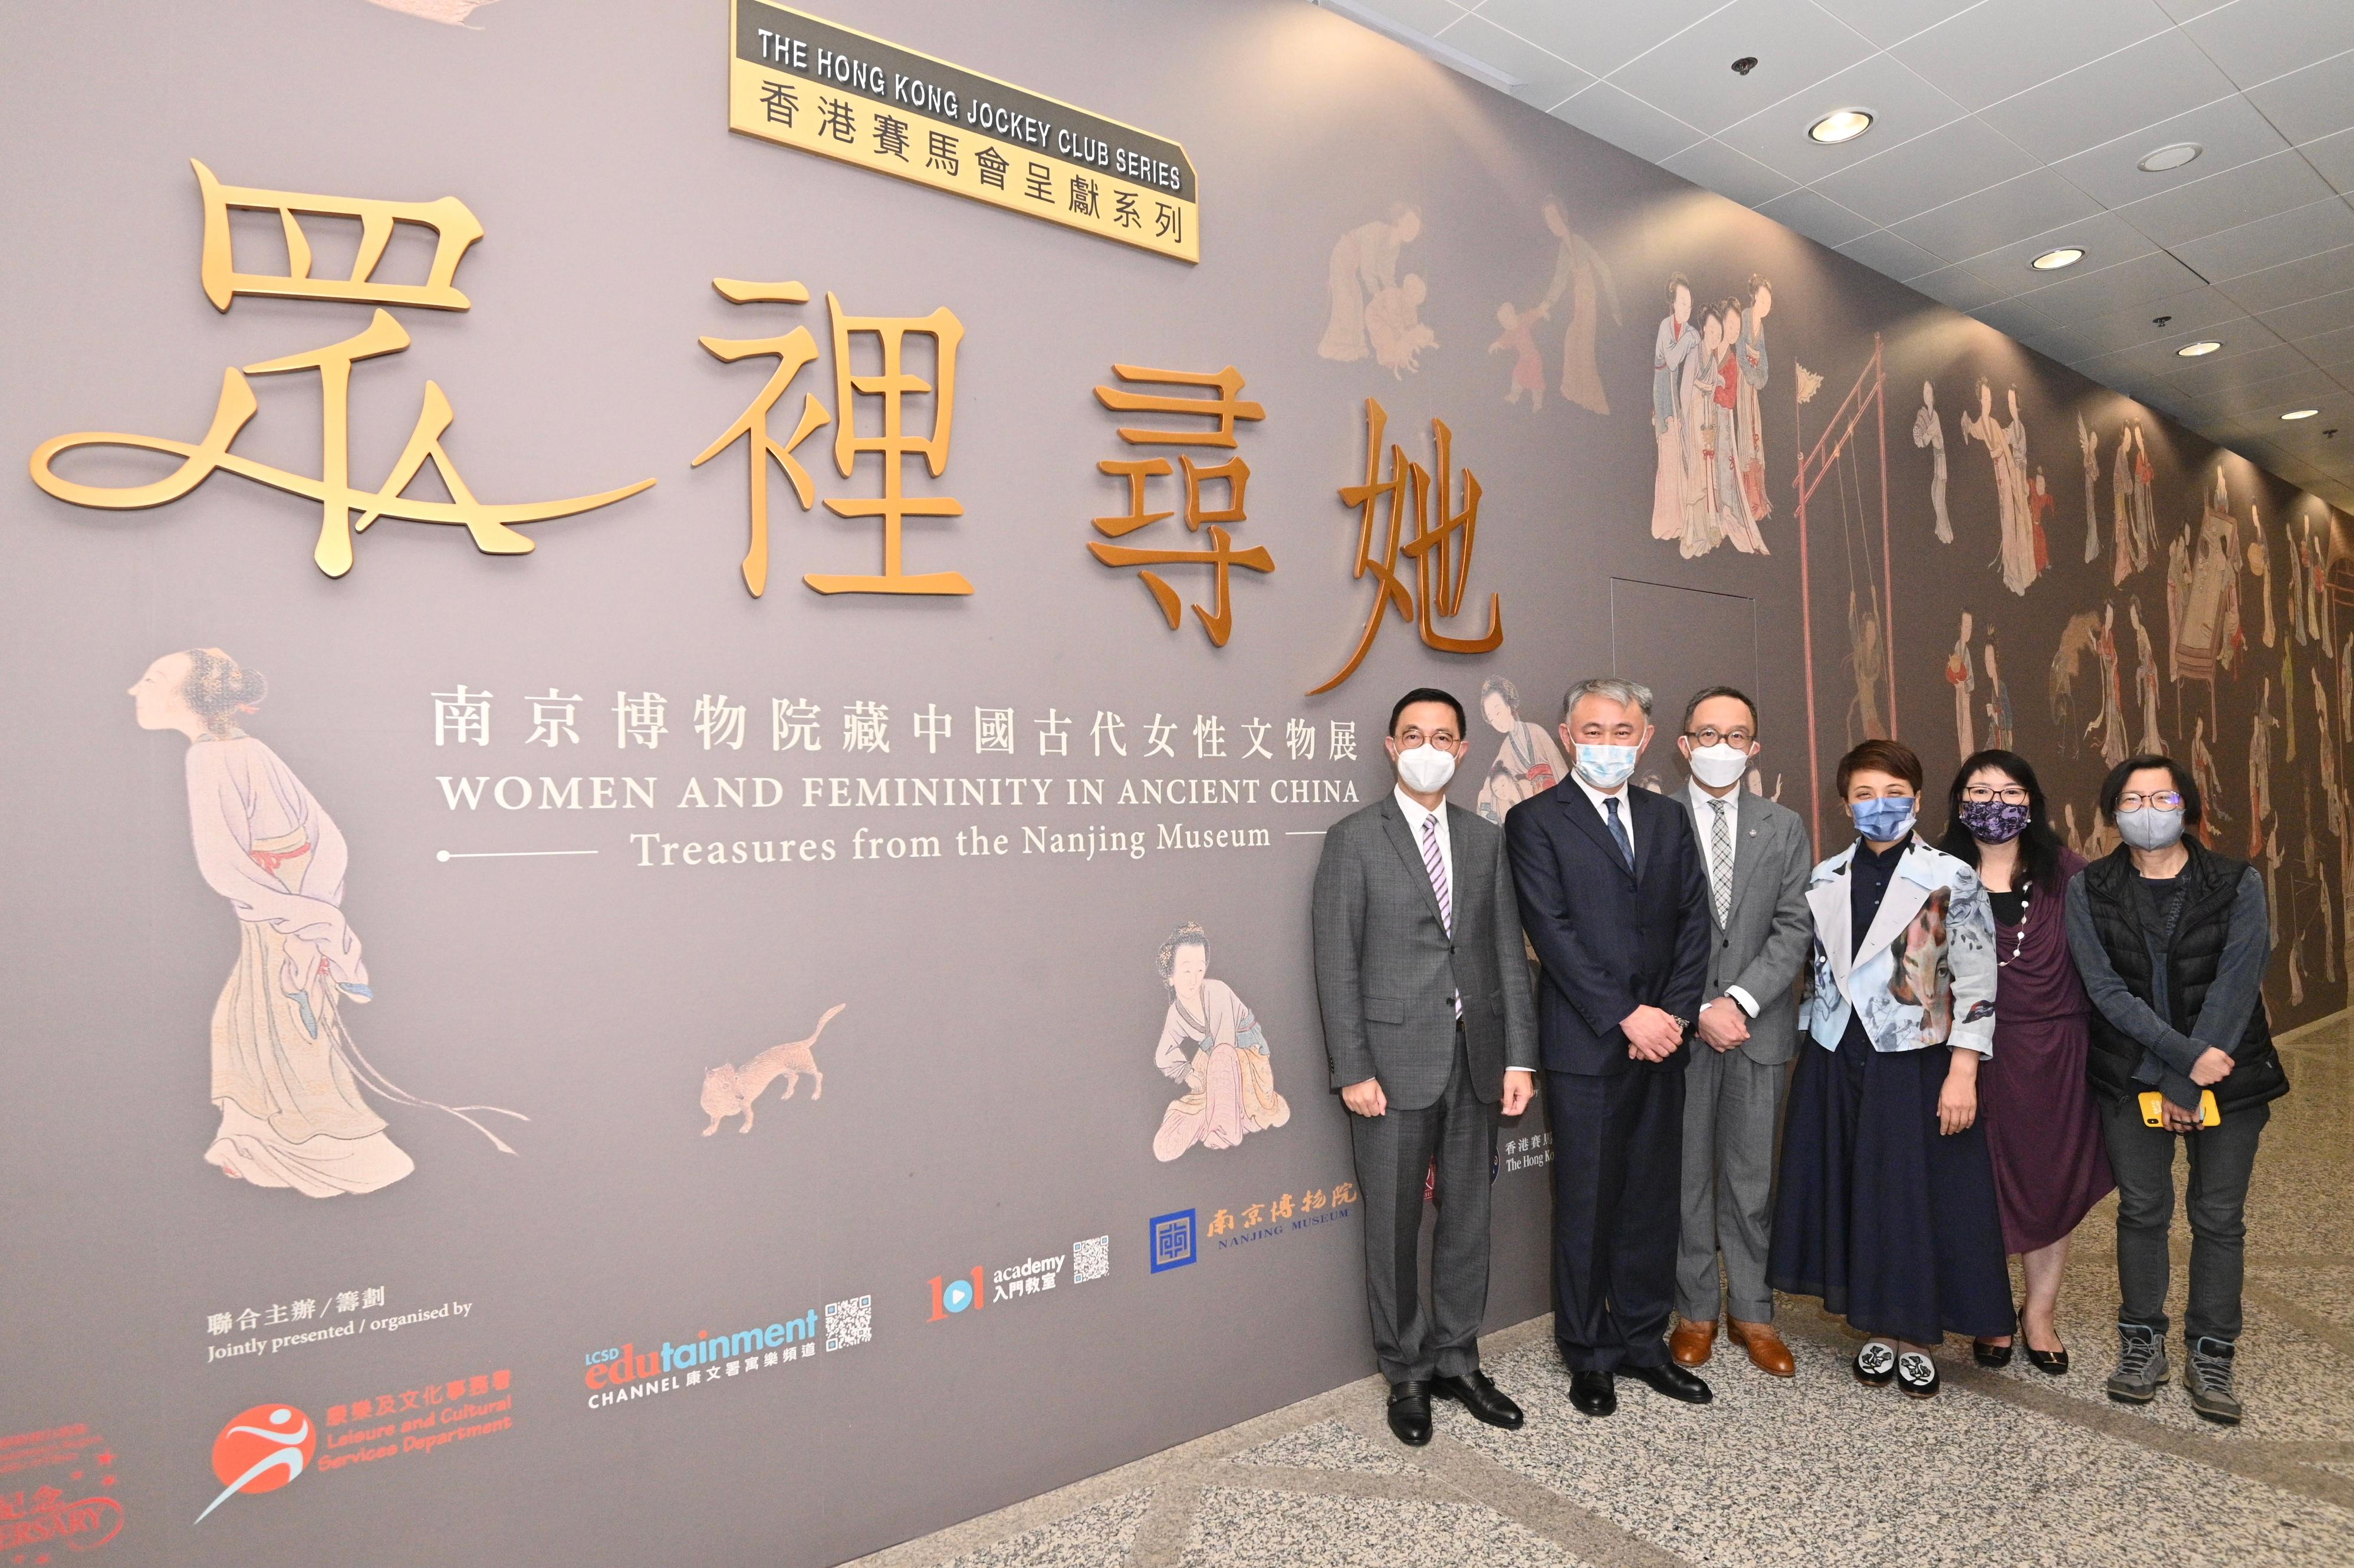 The opening ceremony for the exhibition "The Hong Kong Jockey Club Series: Women and Femininity in Ancient China - Treasures from the Nanjing Museum" was held today (November 29) at the Hong Kong Heritage Museum (HKHM). Photo shows (from left) the Secretary for Culture, Sports and Tourism, Mr Kevin Yeung; the Vice Director of the Nanjing Museum, Mr Wang Qizhi; the Executive Director, Charities and Community of the Hong Kong Jockey Club, Dr Gabriel Leung; the Deputy Director of Leisure and Cultural Services (Culture), Ms Eve Tam; the Museum Director of the HKHM, Ms Fione Lo and the researcher of the Nanjing Museum, Ms Cao Qing touring the exhibition.